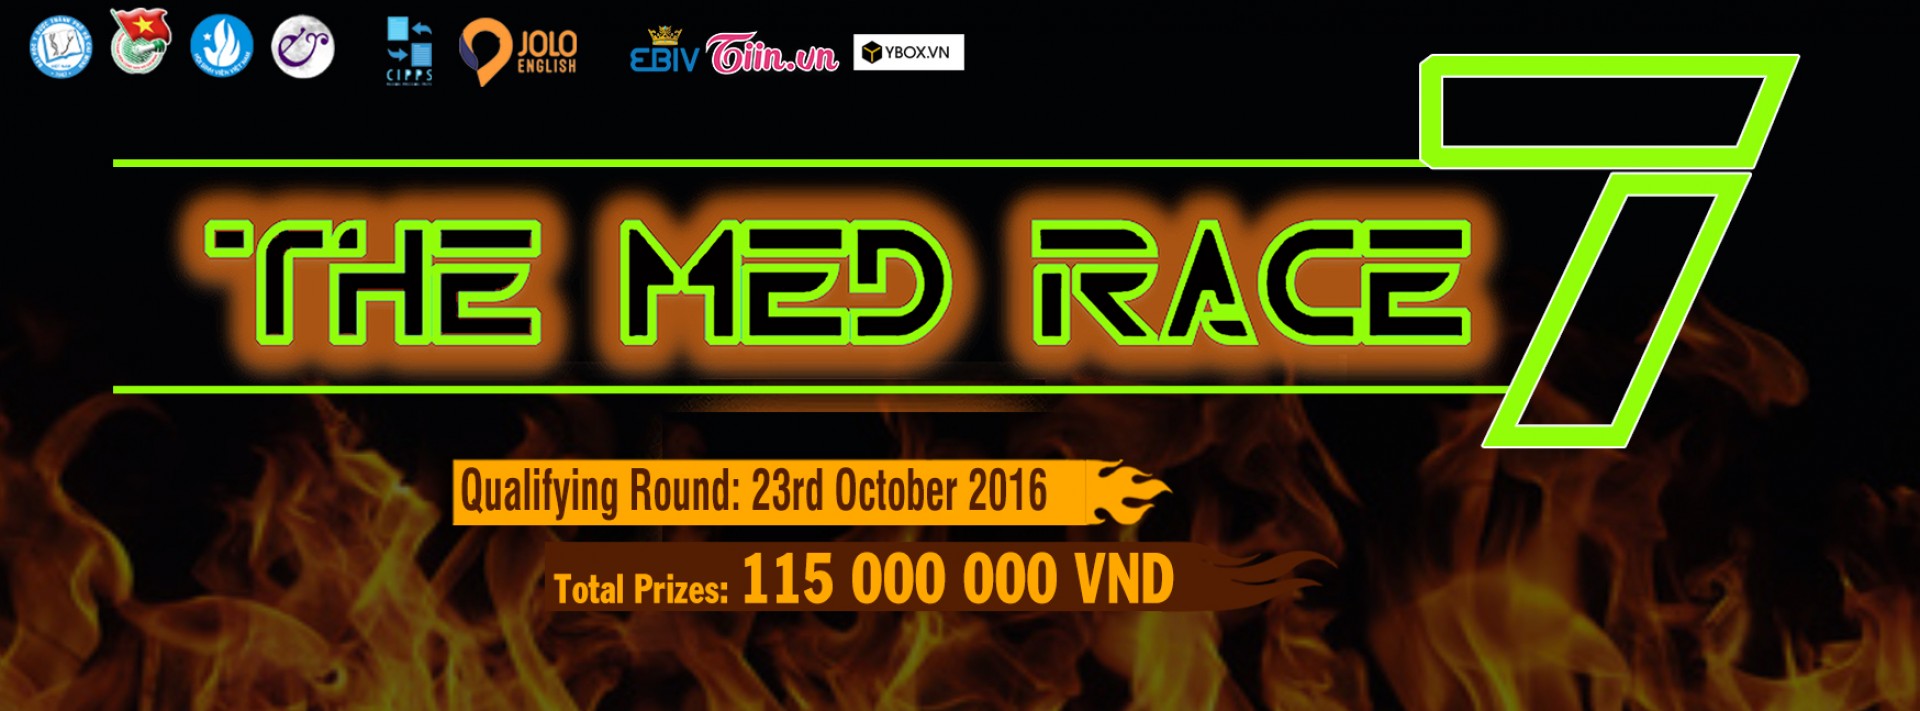 THE MED RACE 7 - H.E.I English Speaking Club